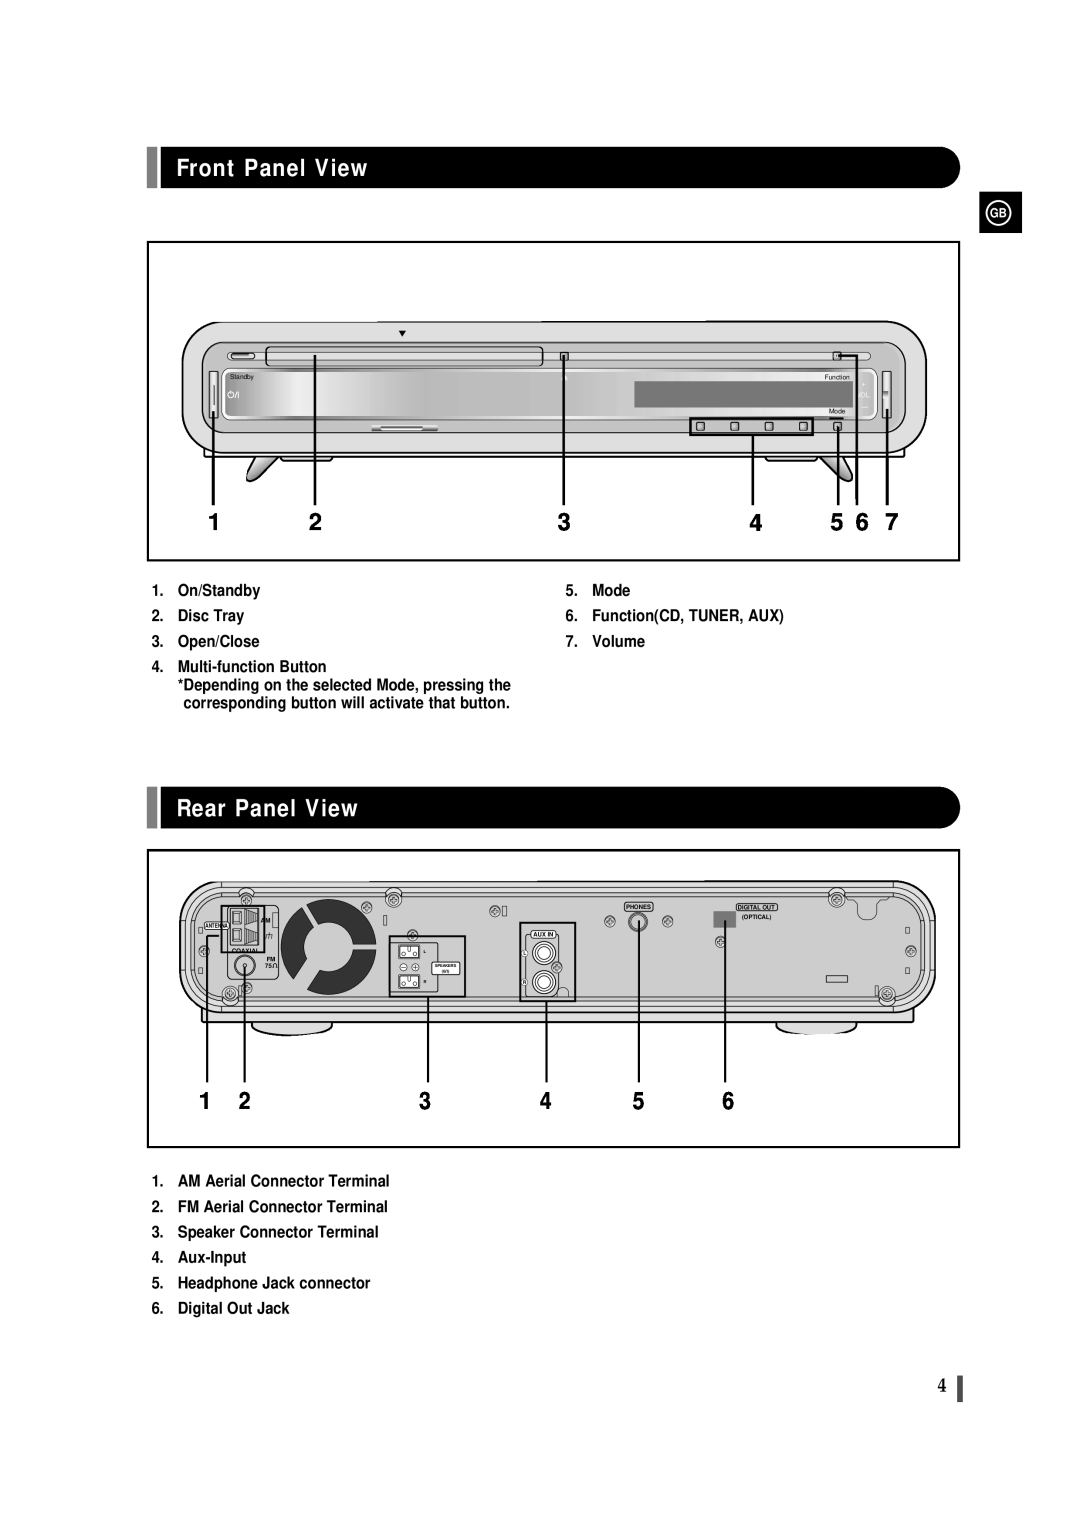 Samsung EV-1S instruction manual Front Panel View, Rear Panel View 